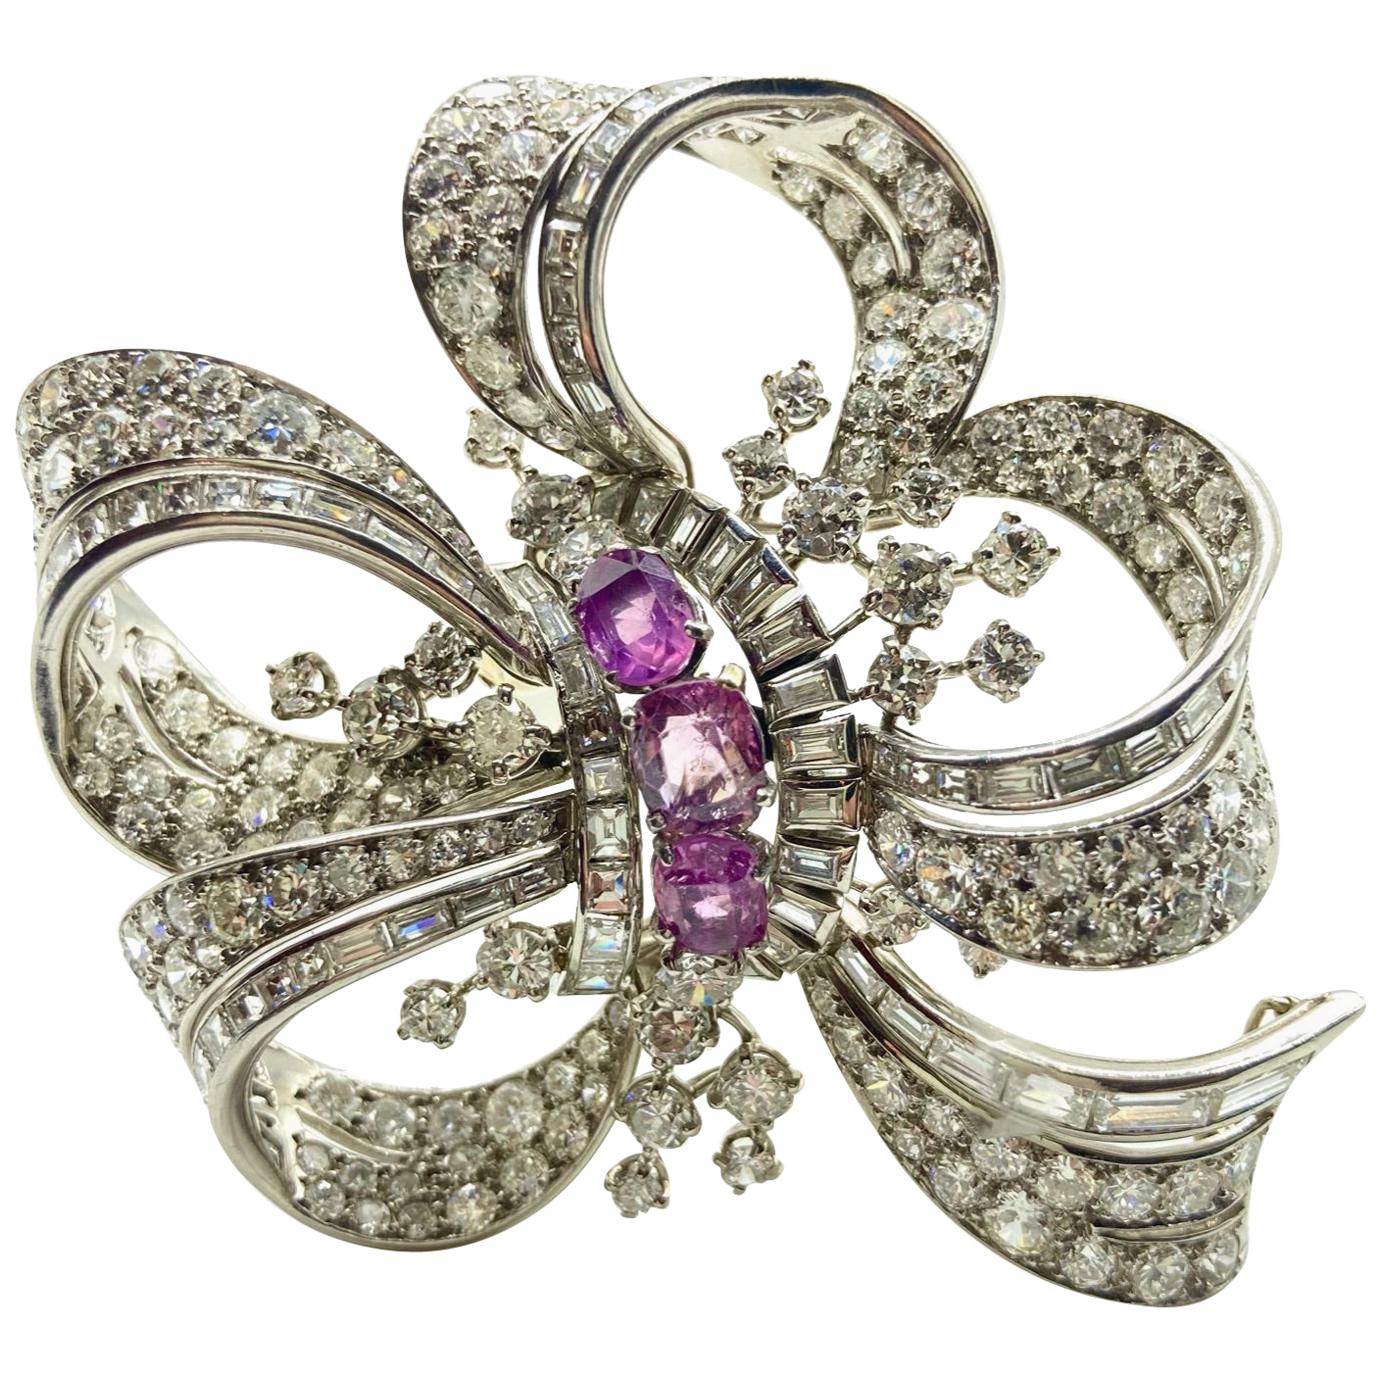 Retro Pink Sapphire and Diamond Bow Brooch by Regner Paris